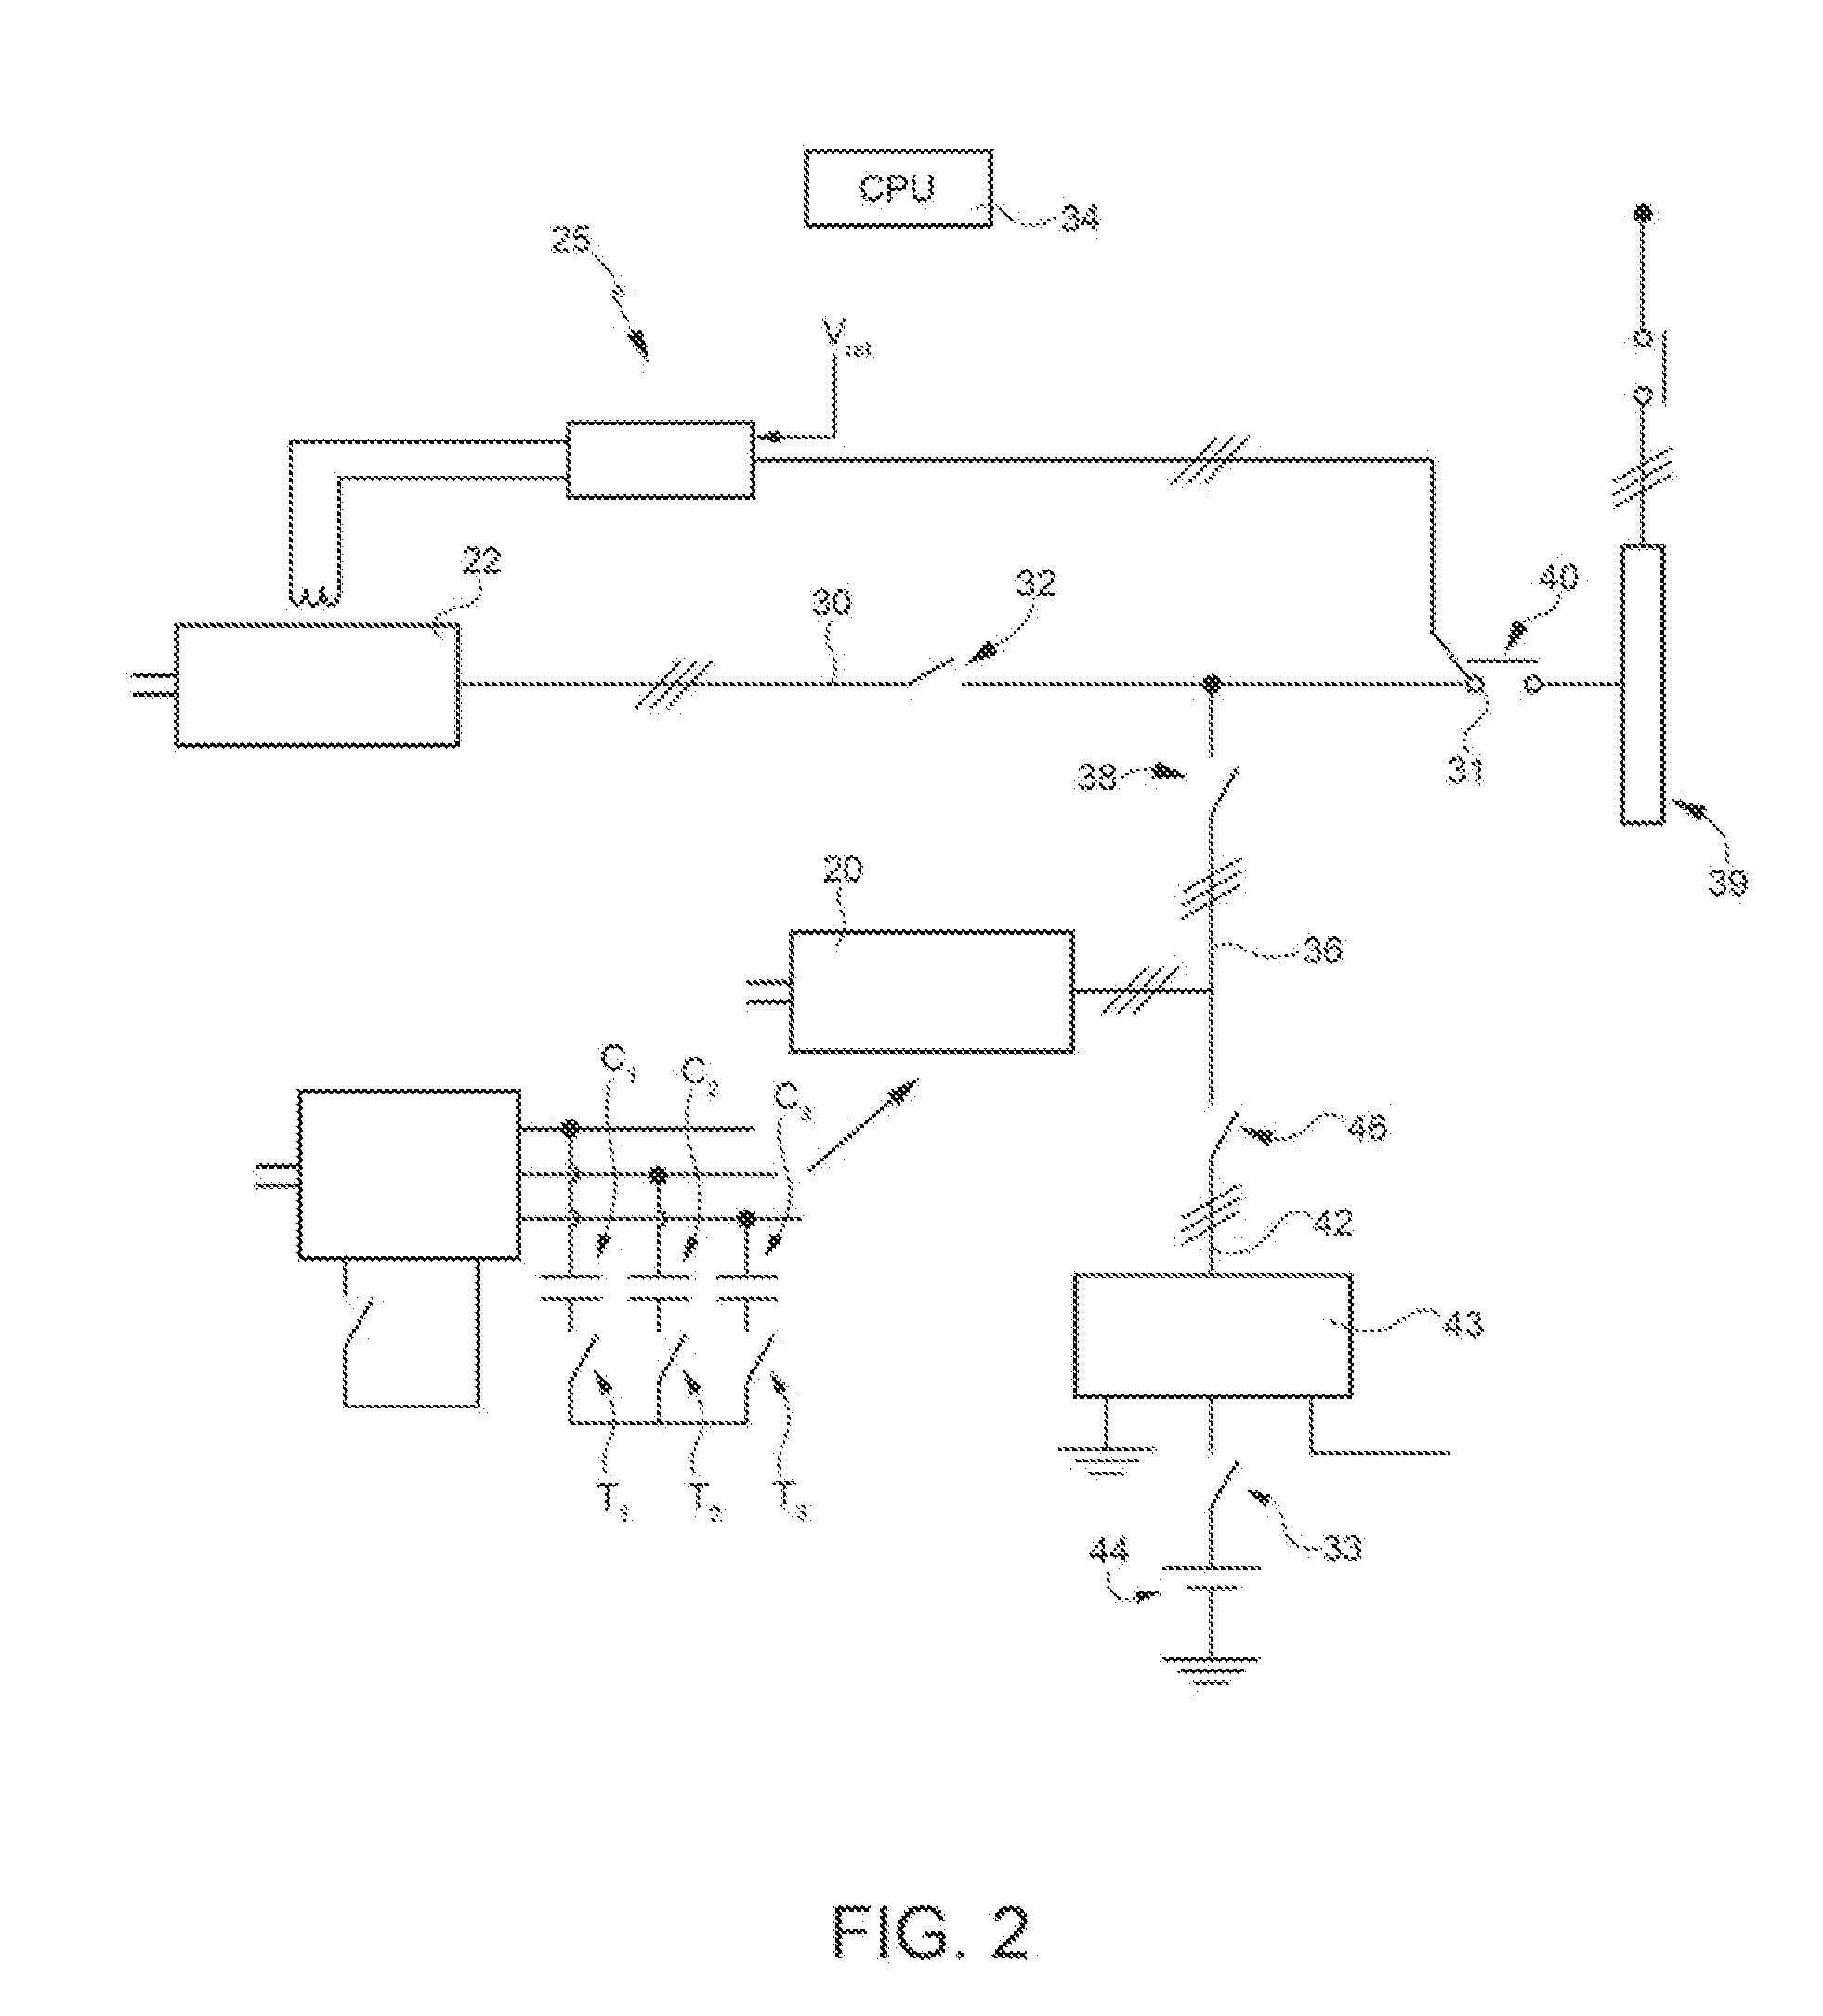 System for in-flight restarting of a multi-shaft turboprop engine